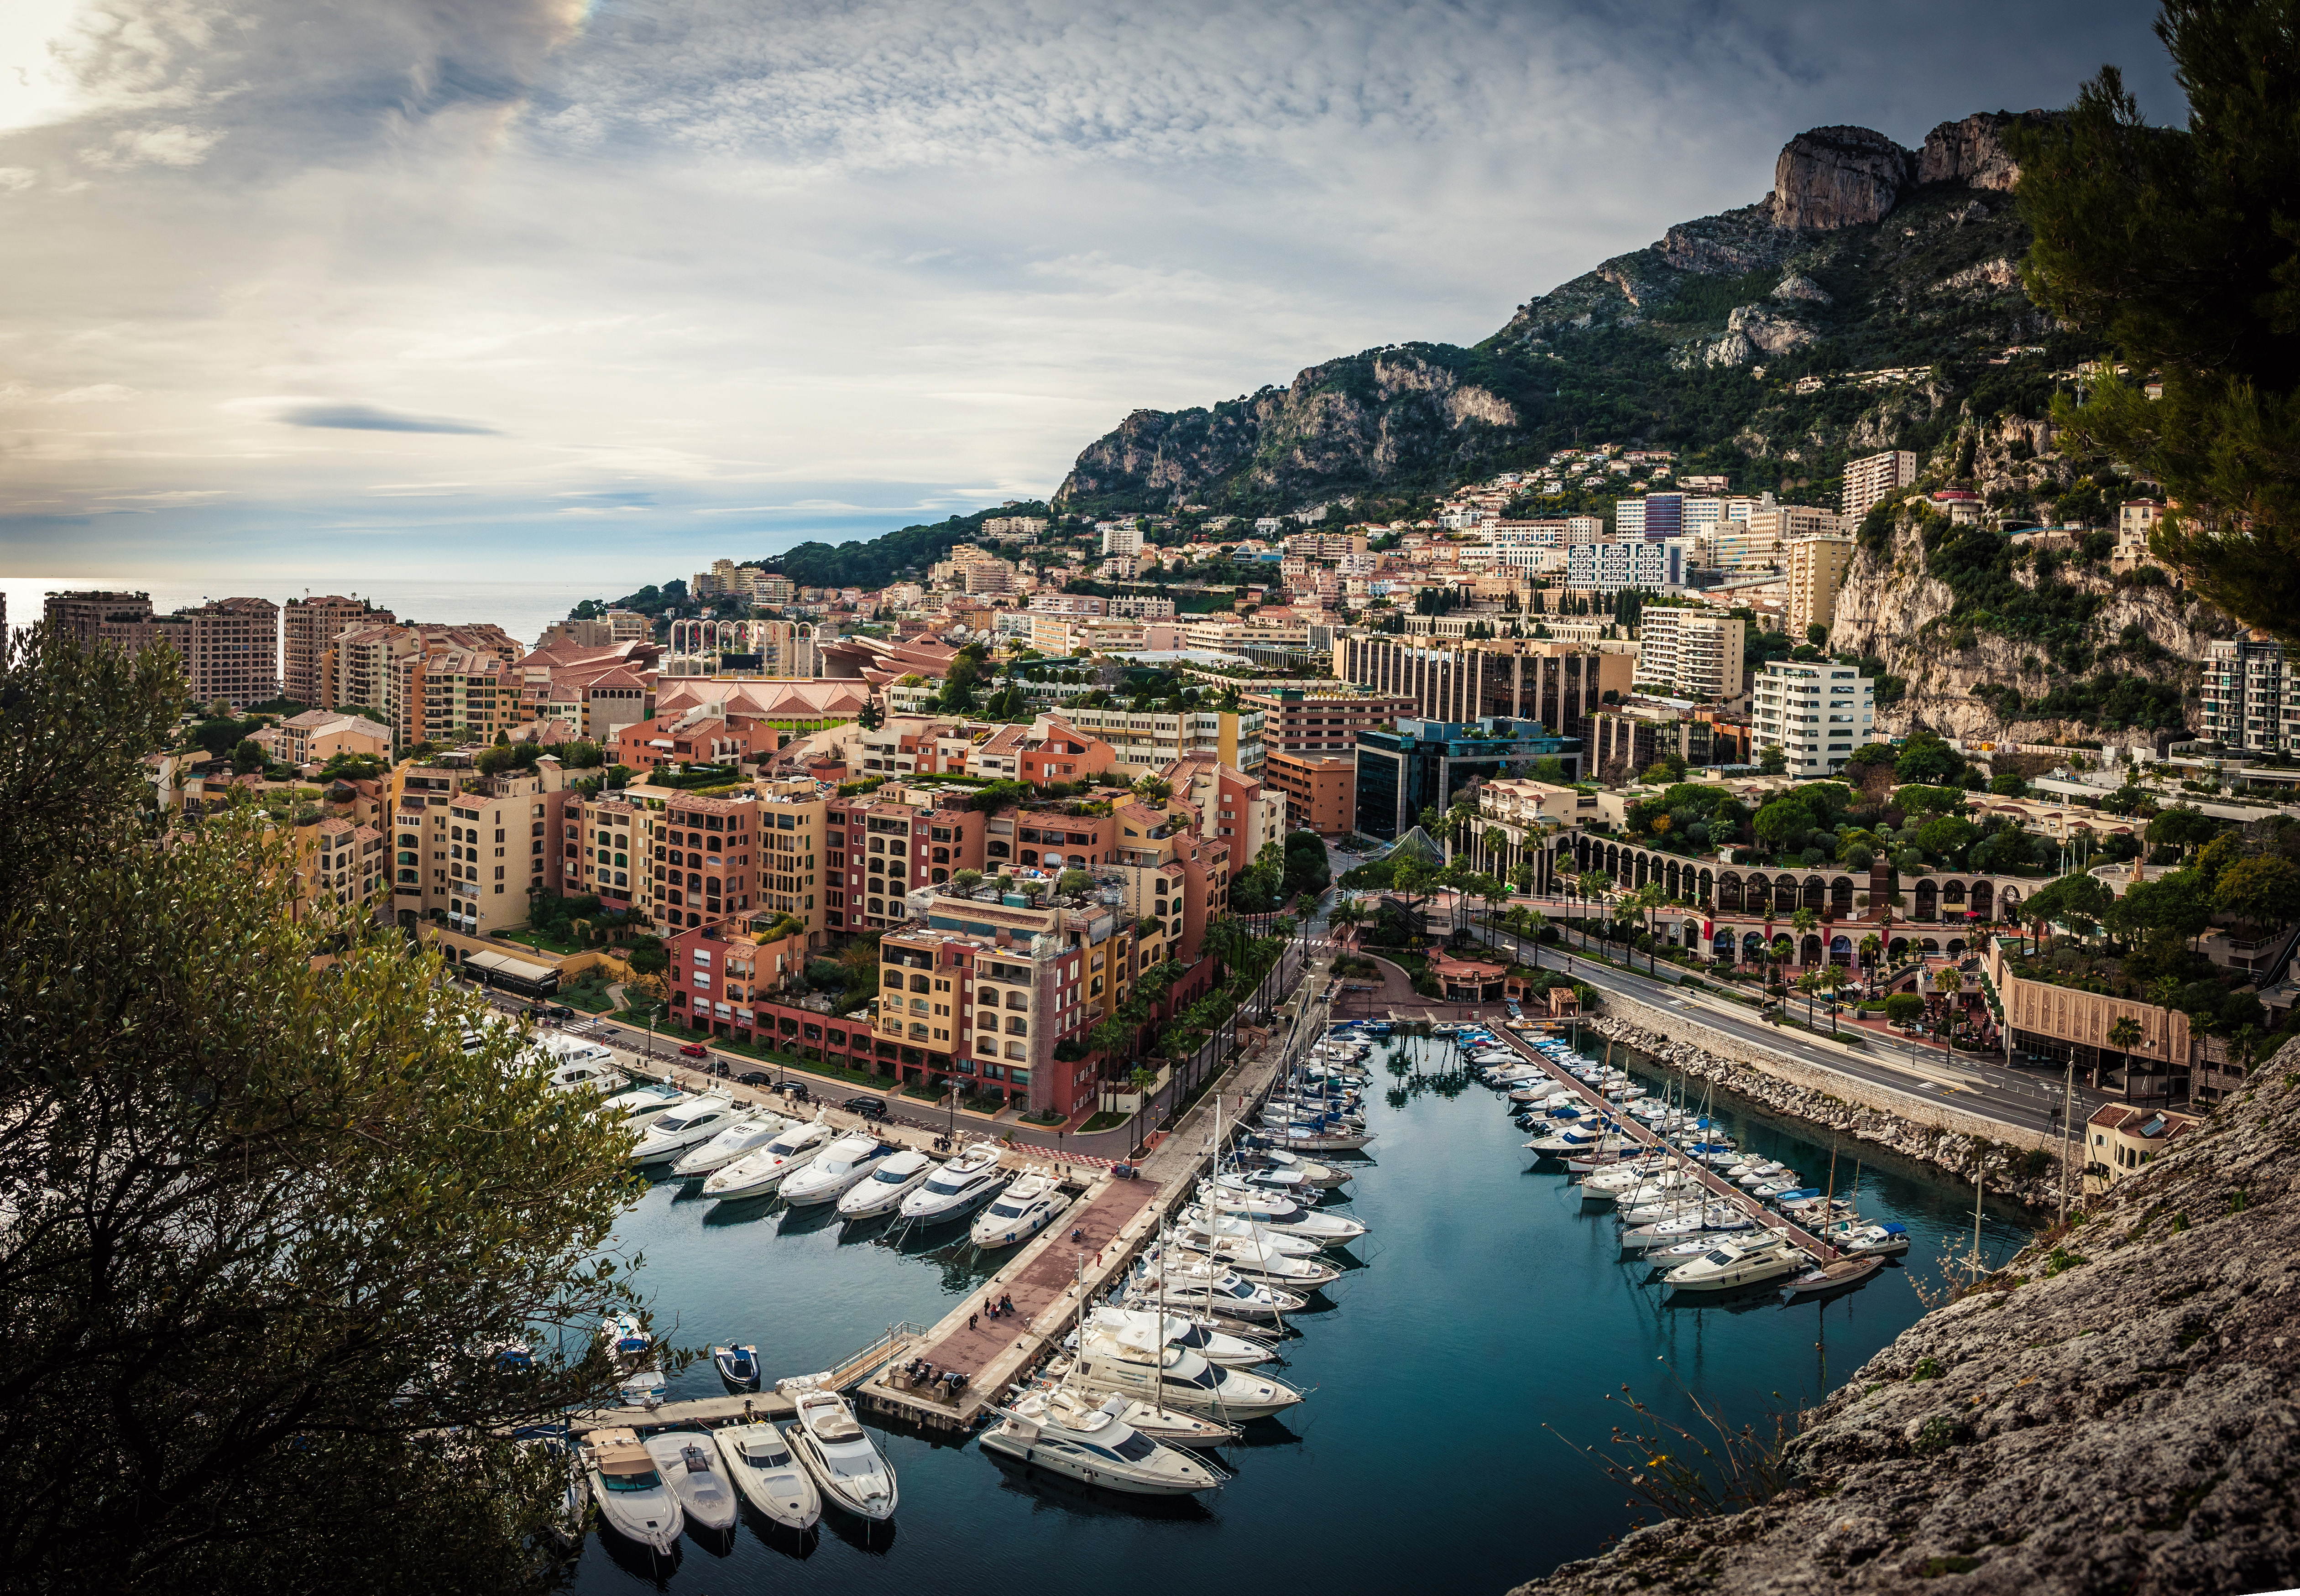 City side and docks and boats in Monaco image - Free stock photo - Public Domain photo - CC0 Images